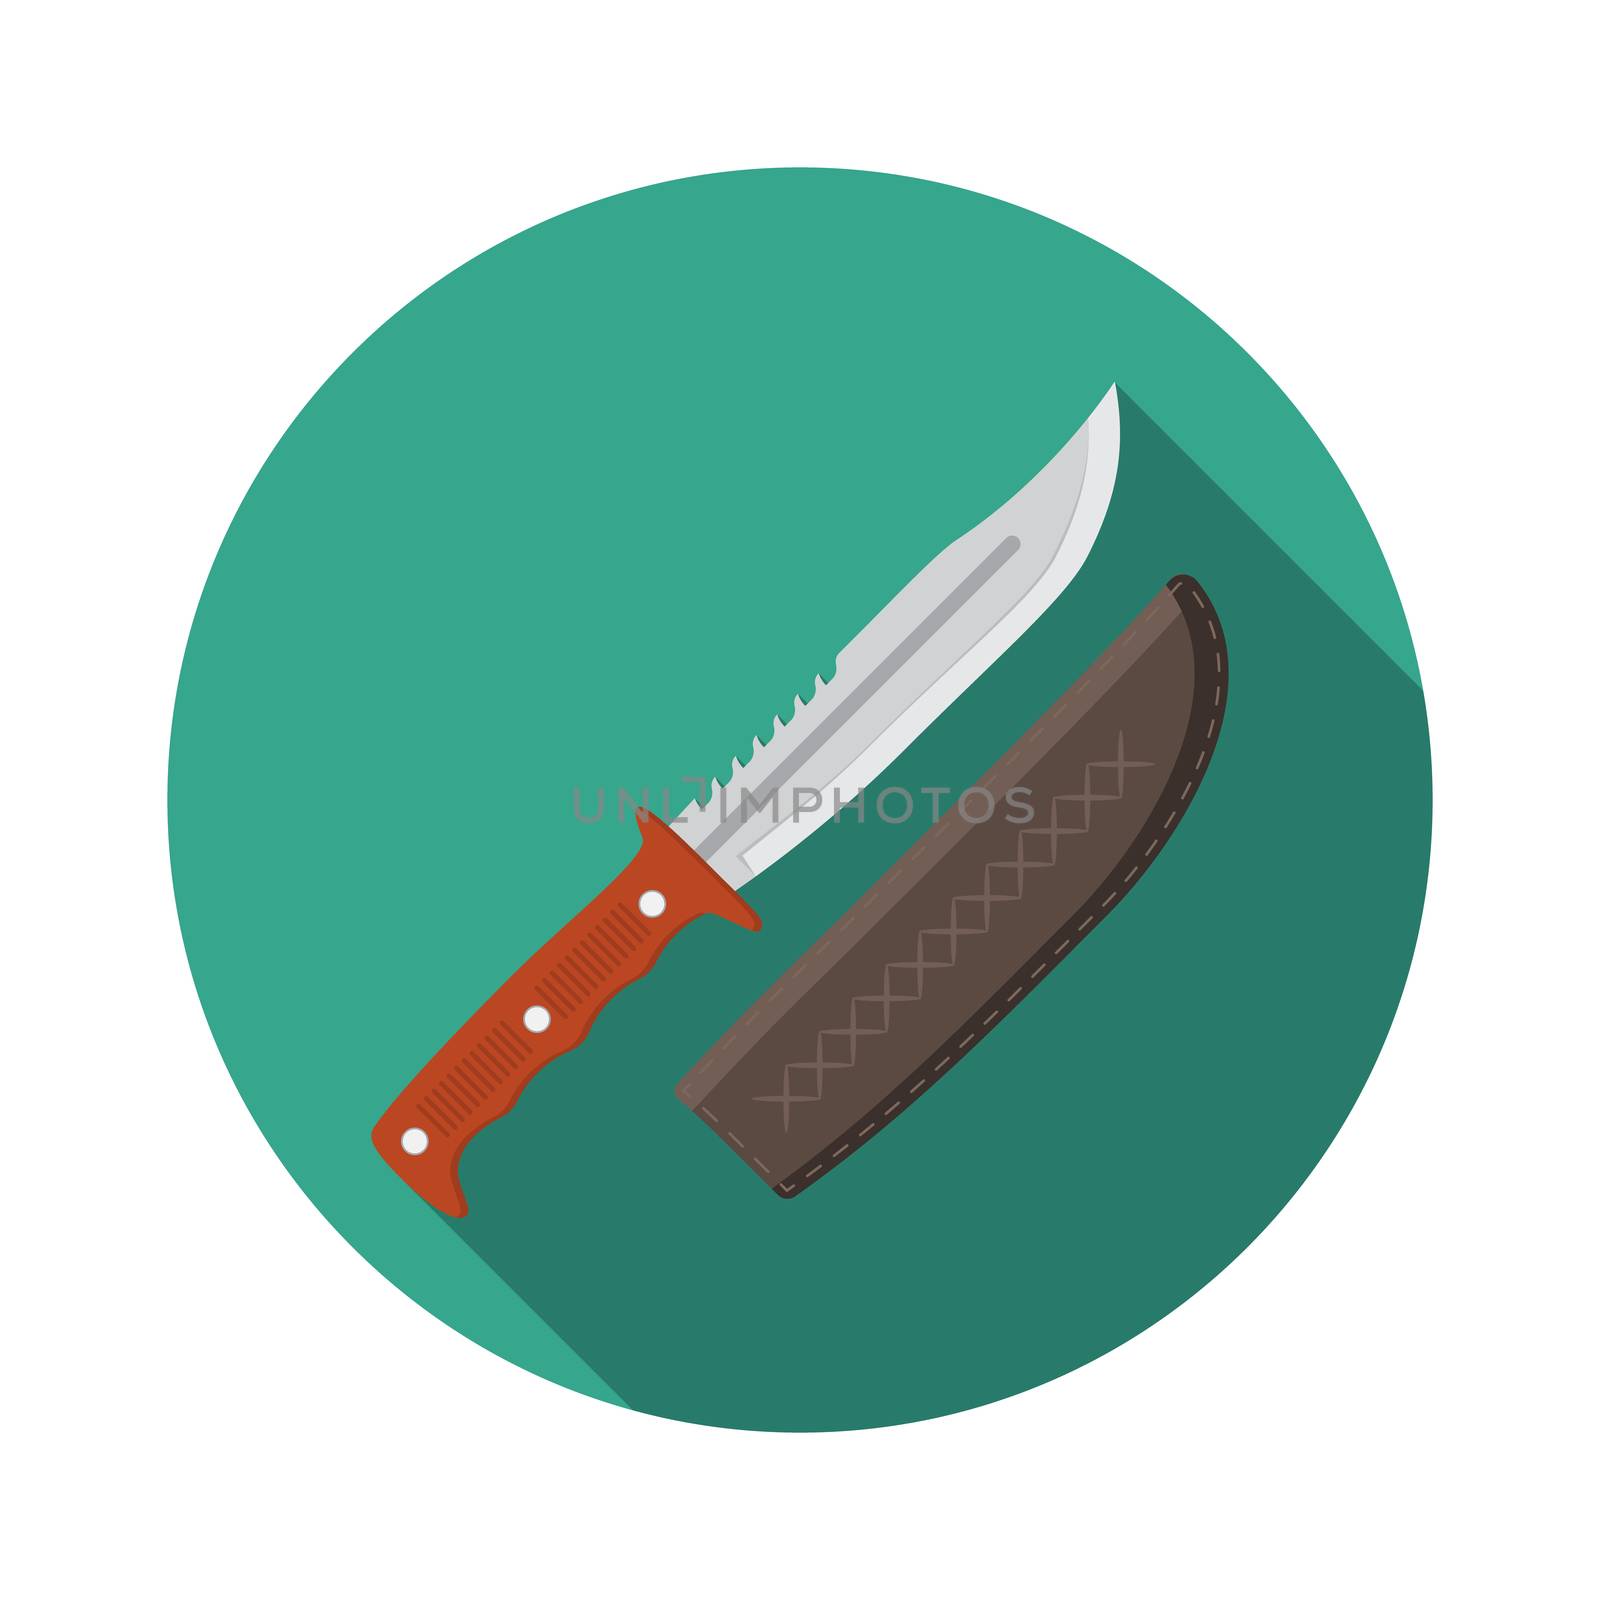 Flat design modern vector illustration of hunting knife icon, camping and hiking equipment with long shadow by Lemon_workshop